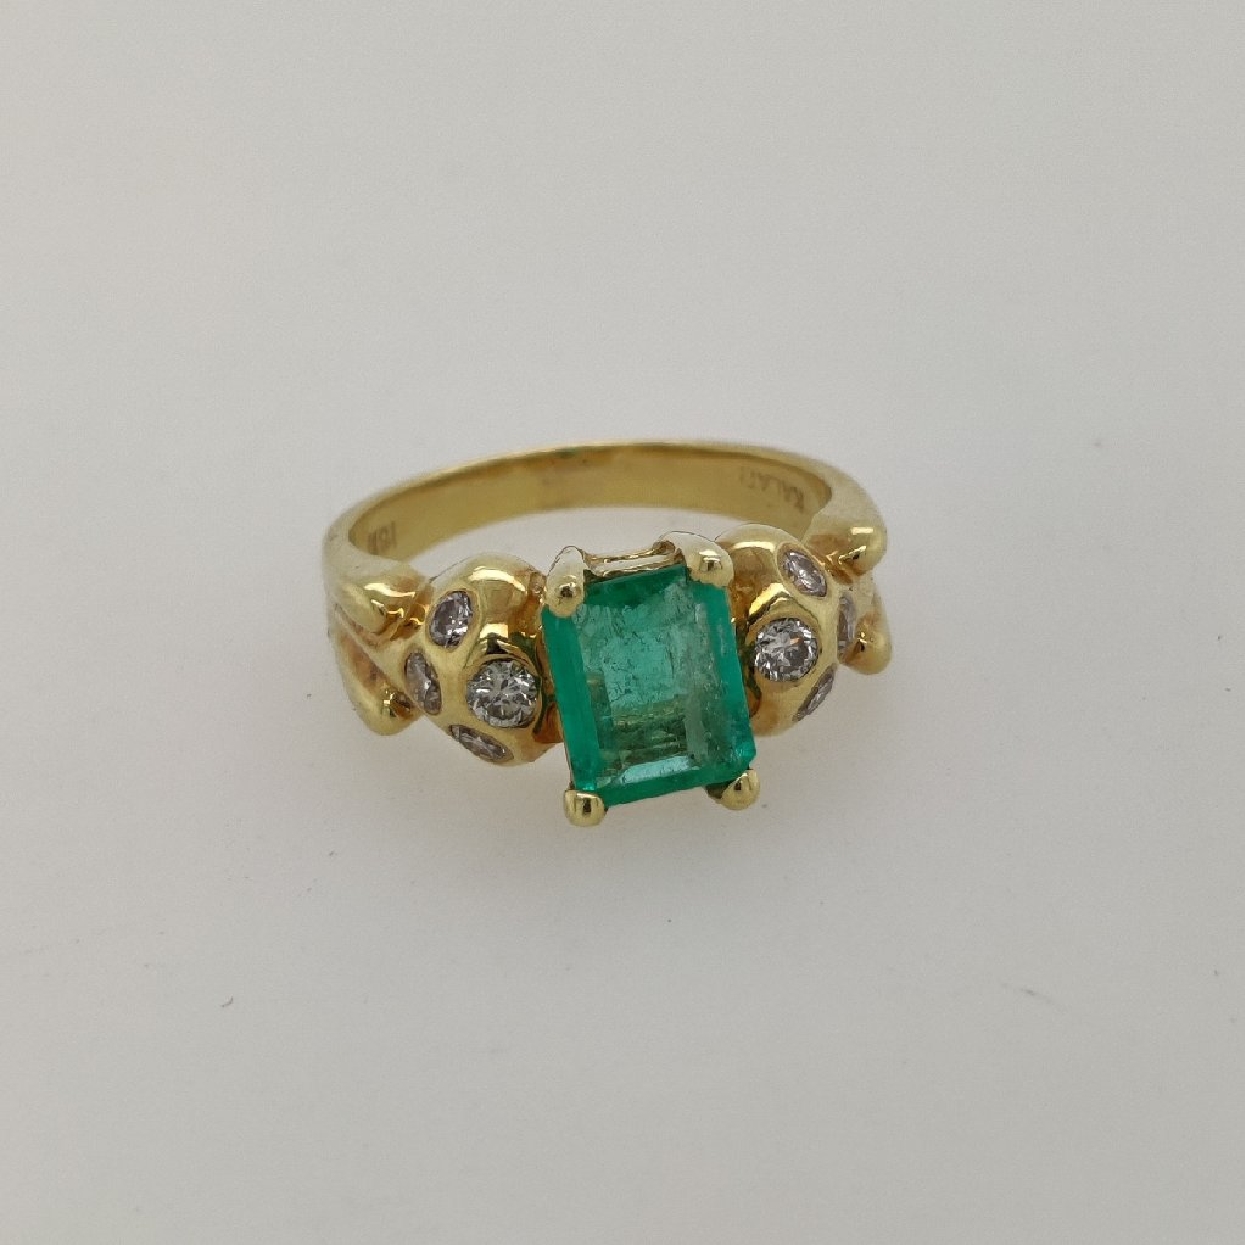 18k Yellow Gold Emerald Cut Emerald Ring with Diamond Accents Size 6.25